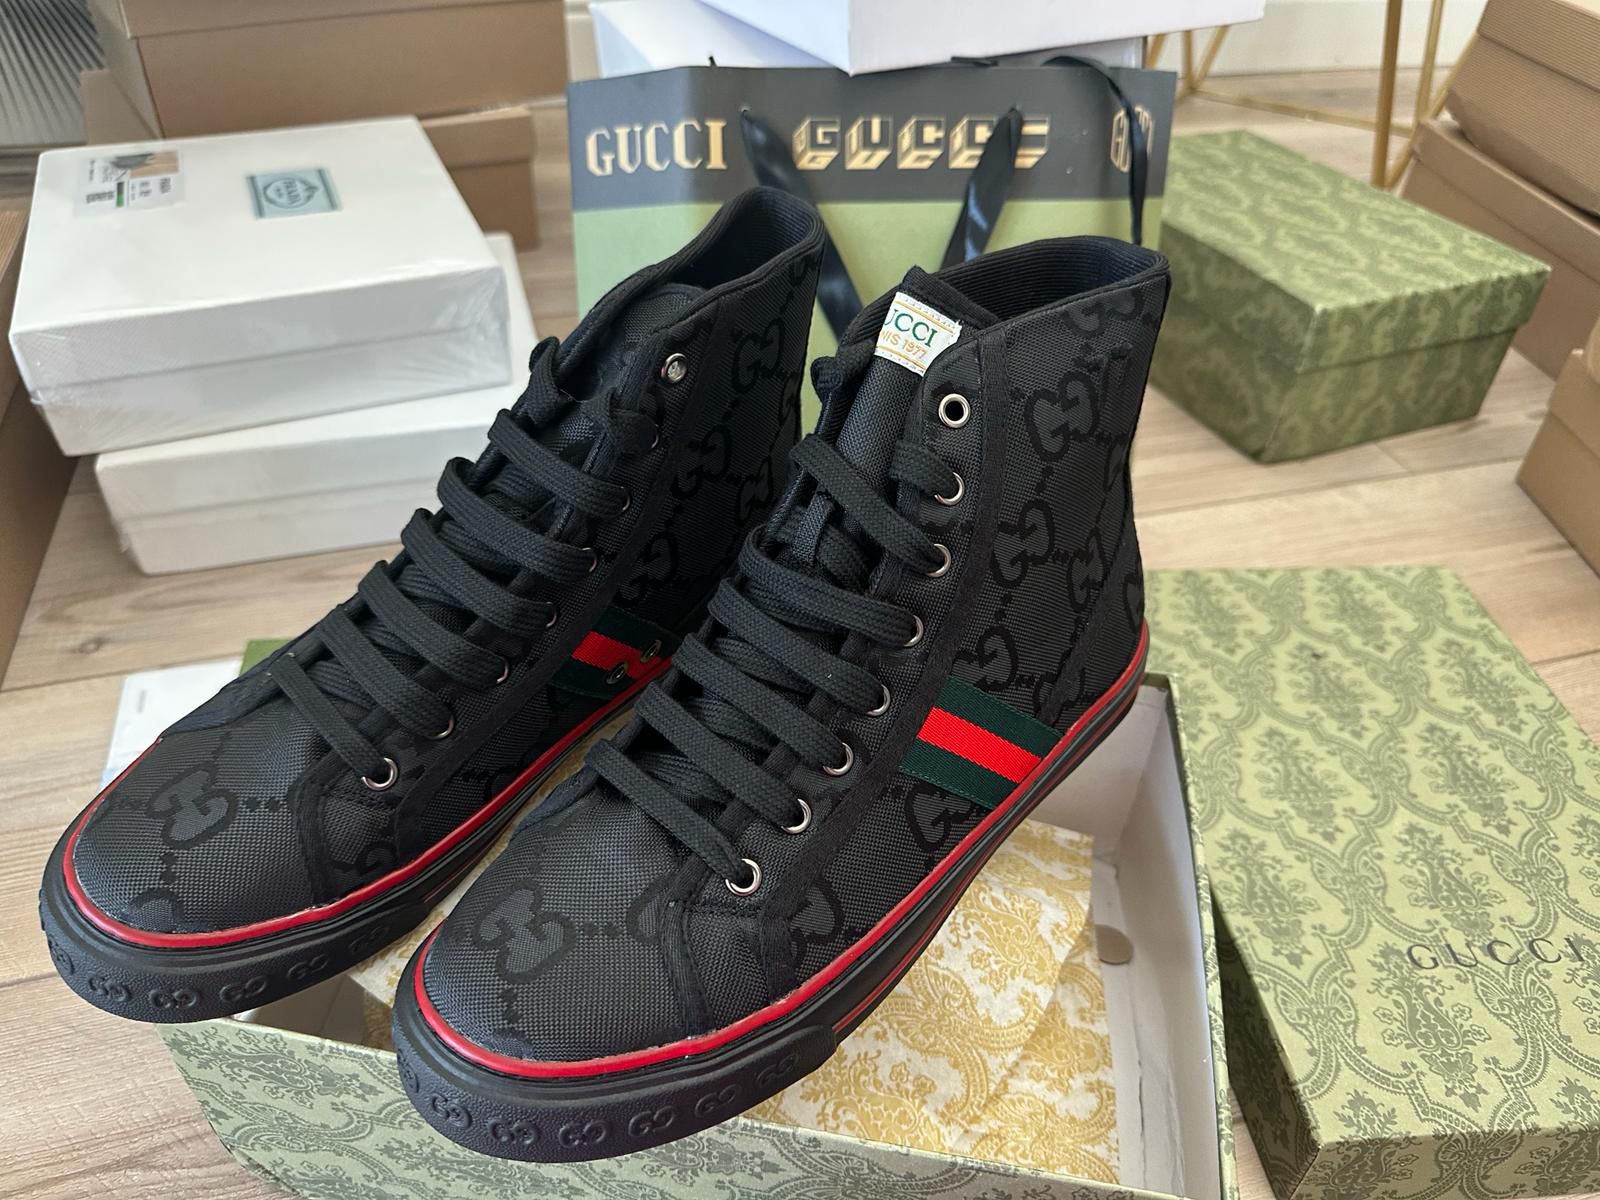 New In The Box, Gucci  Shoes, Euro 38 